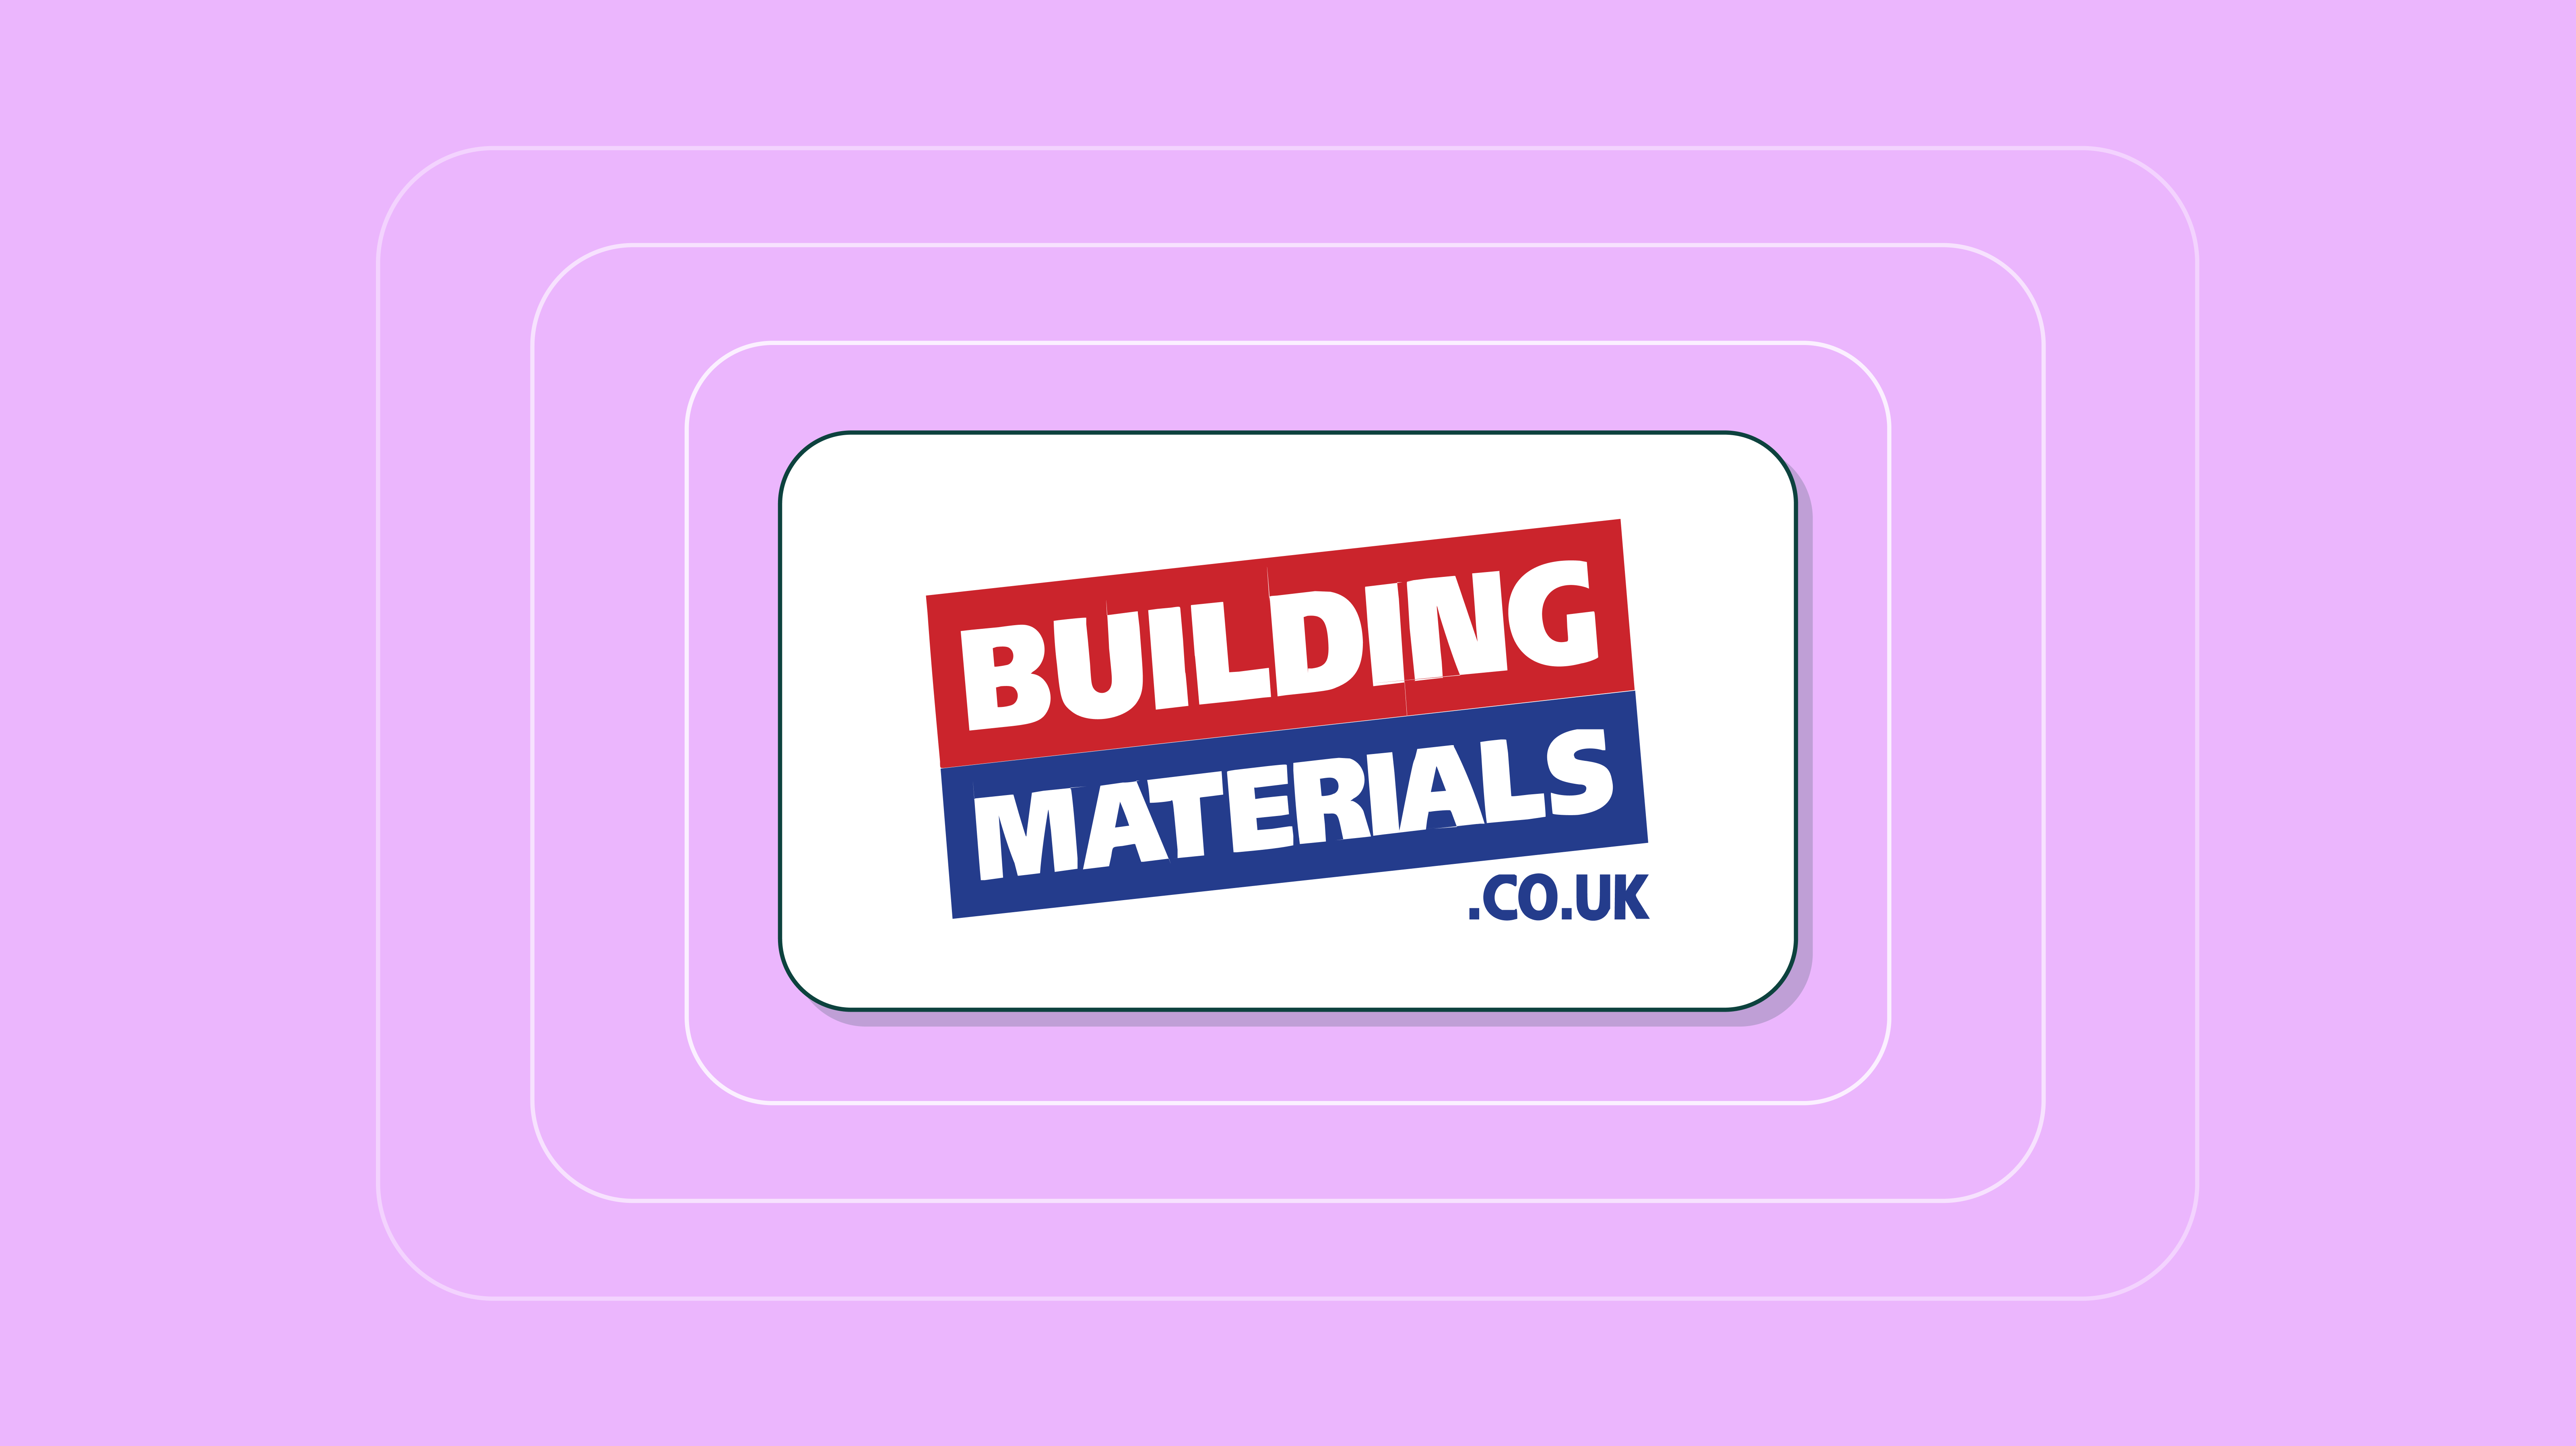 Discussing The PIM Revolution with BuildingMaterials.co.uk